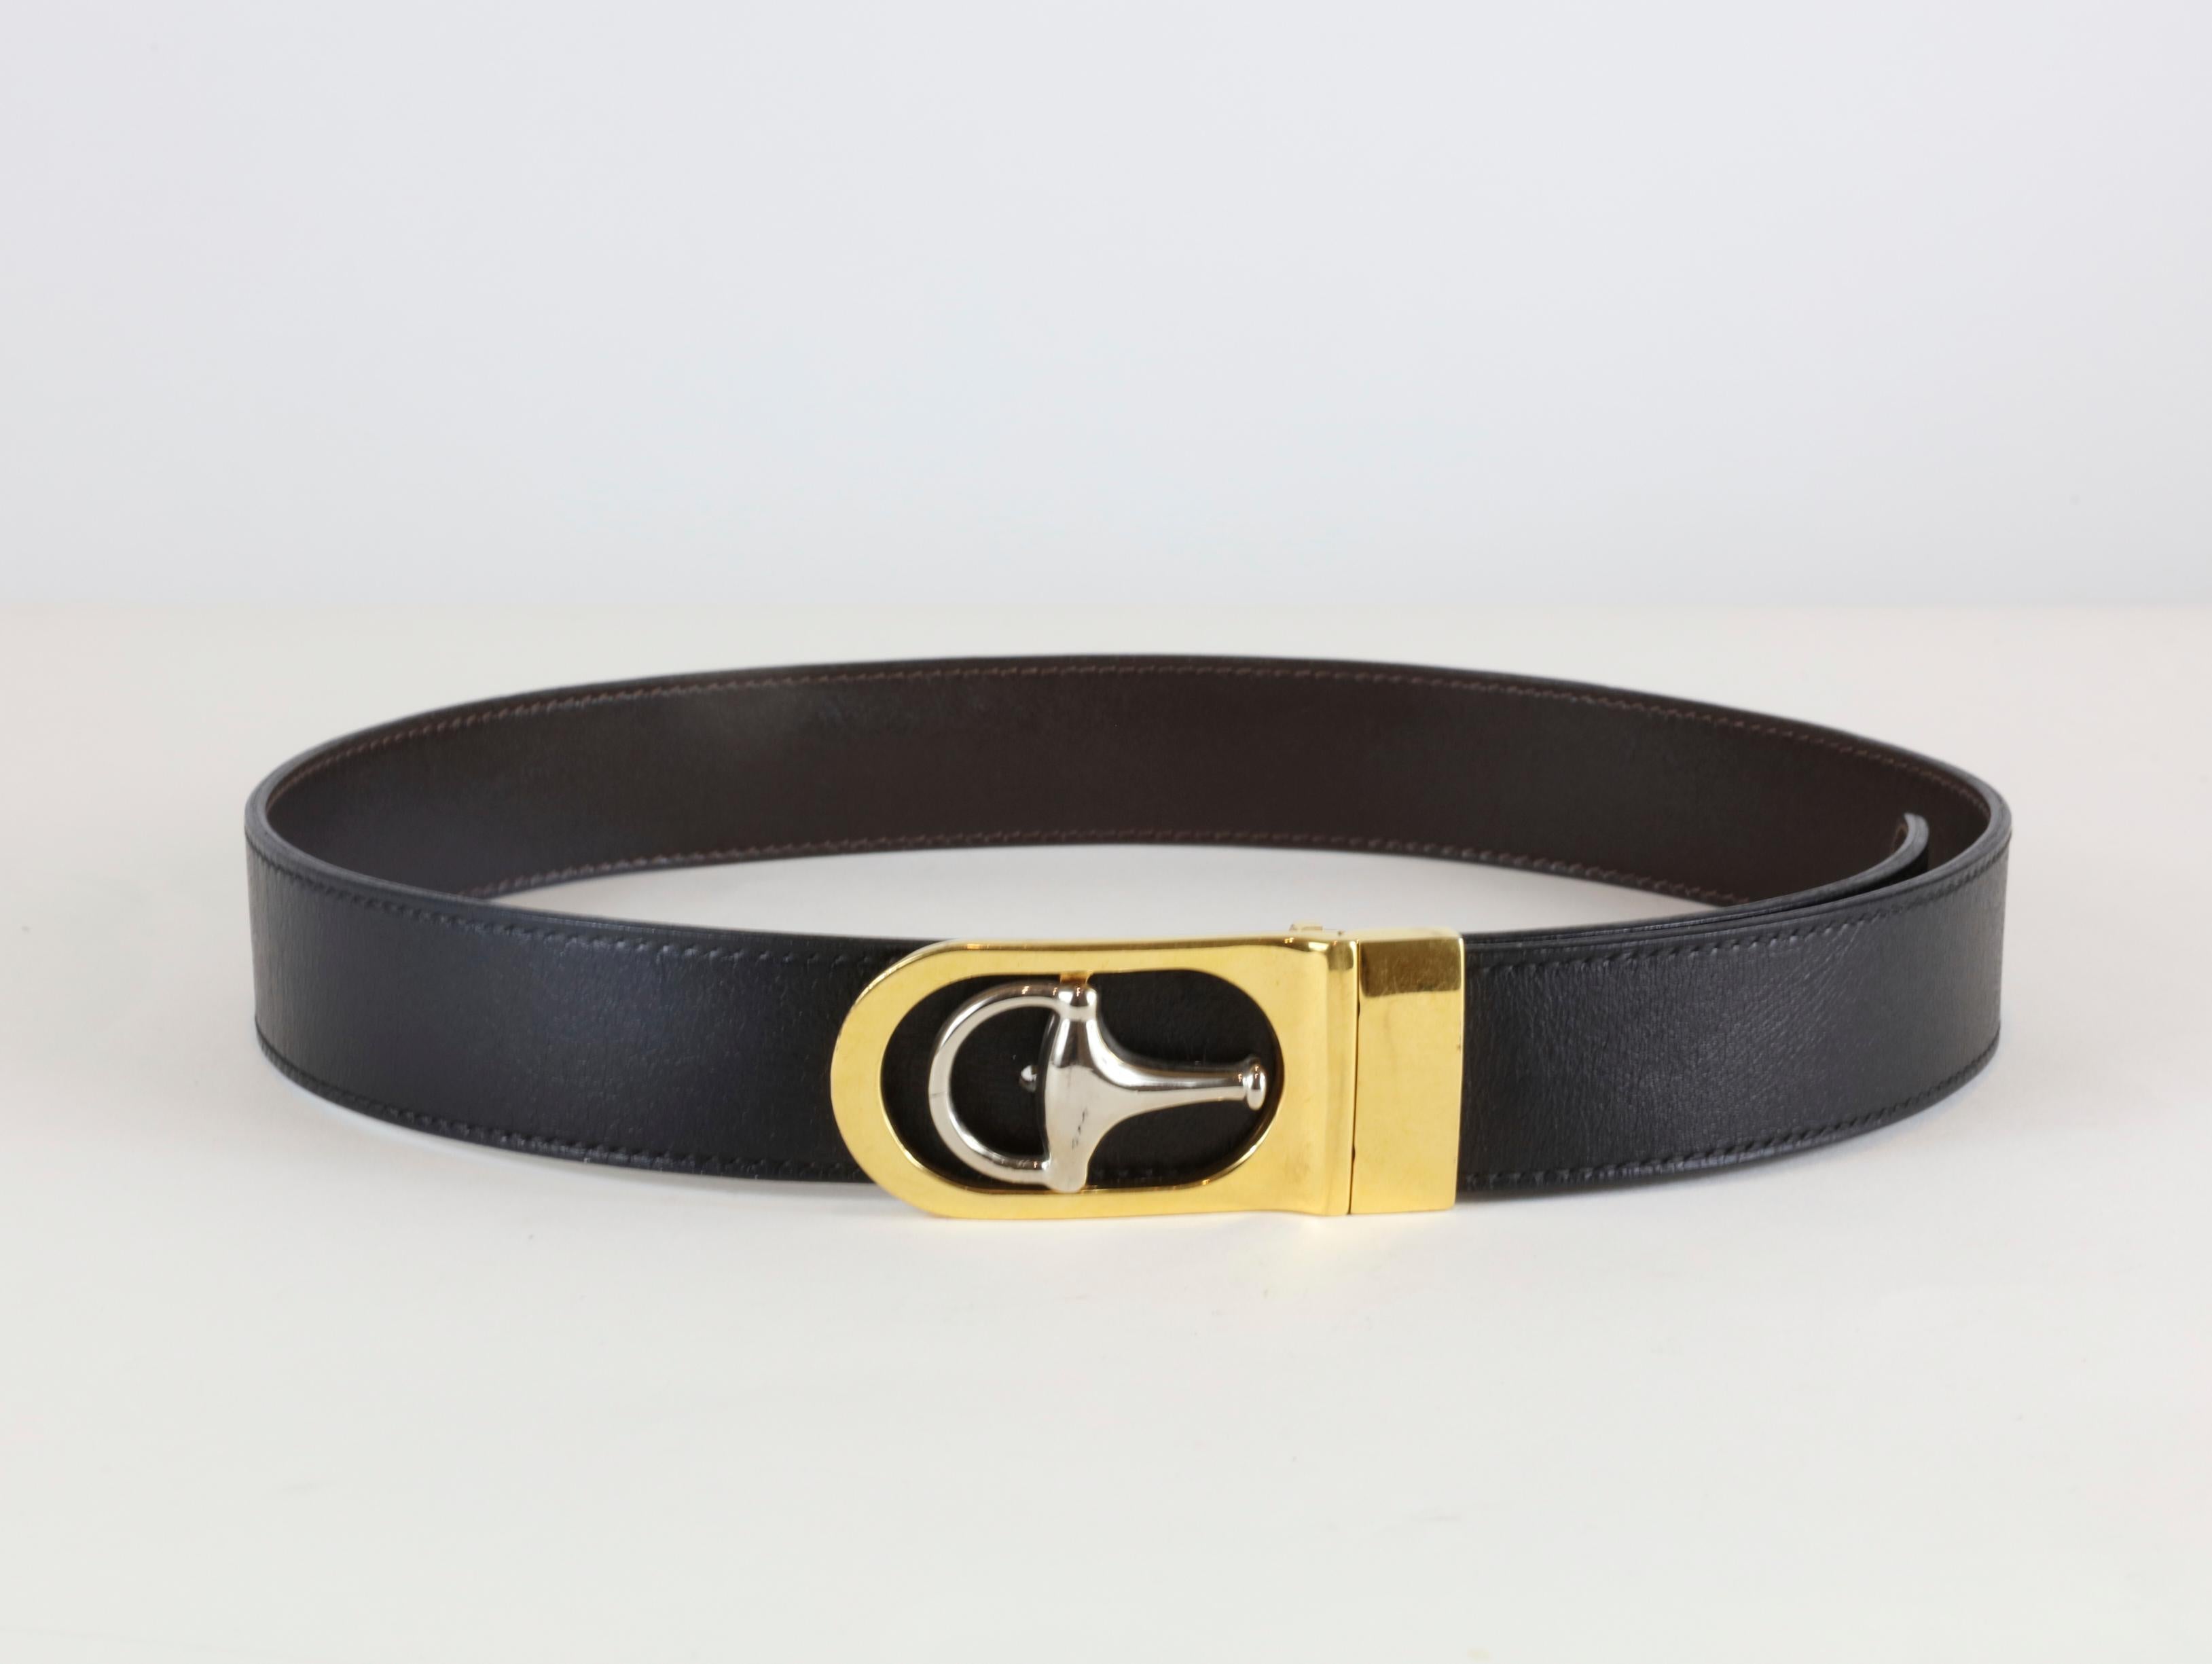 Gucci Black Leather Belt with Silver and Gold Hardware im Zustand „Gut“ in Bridgehampton, NY